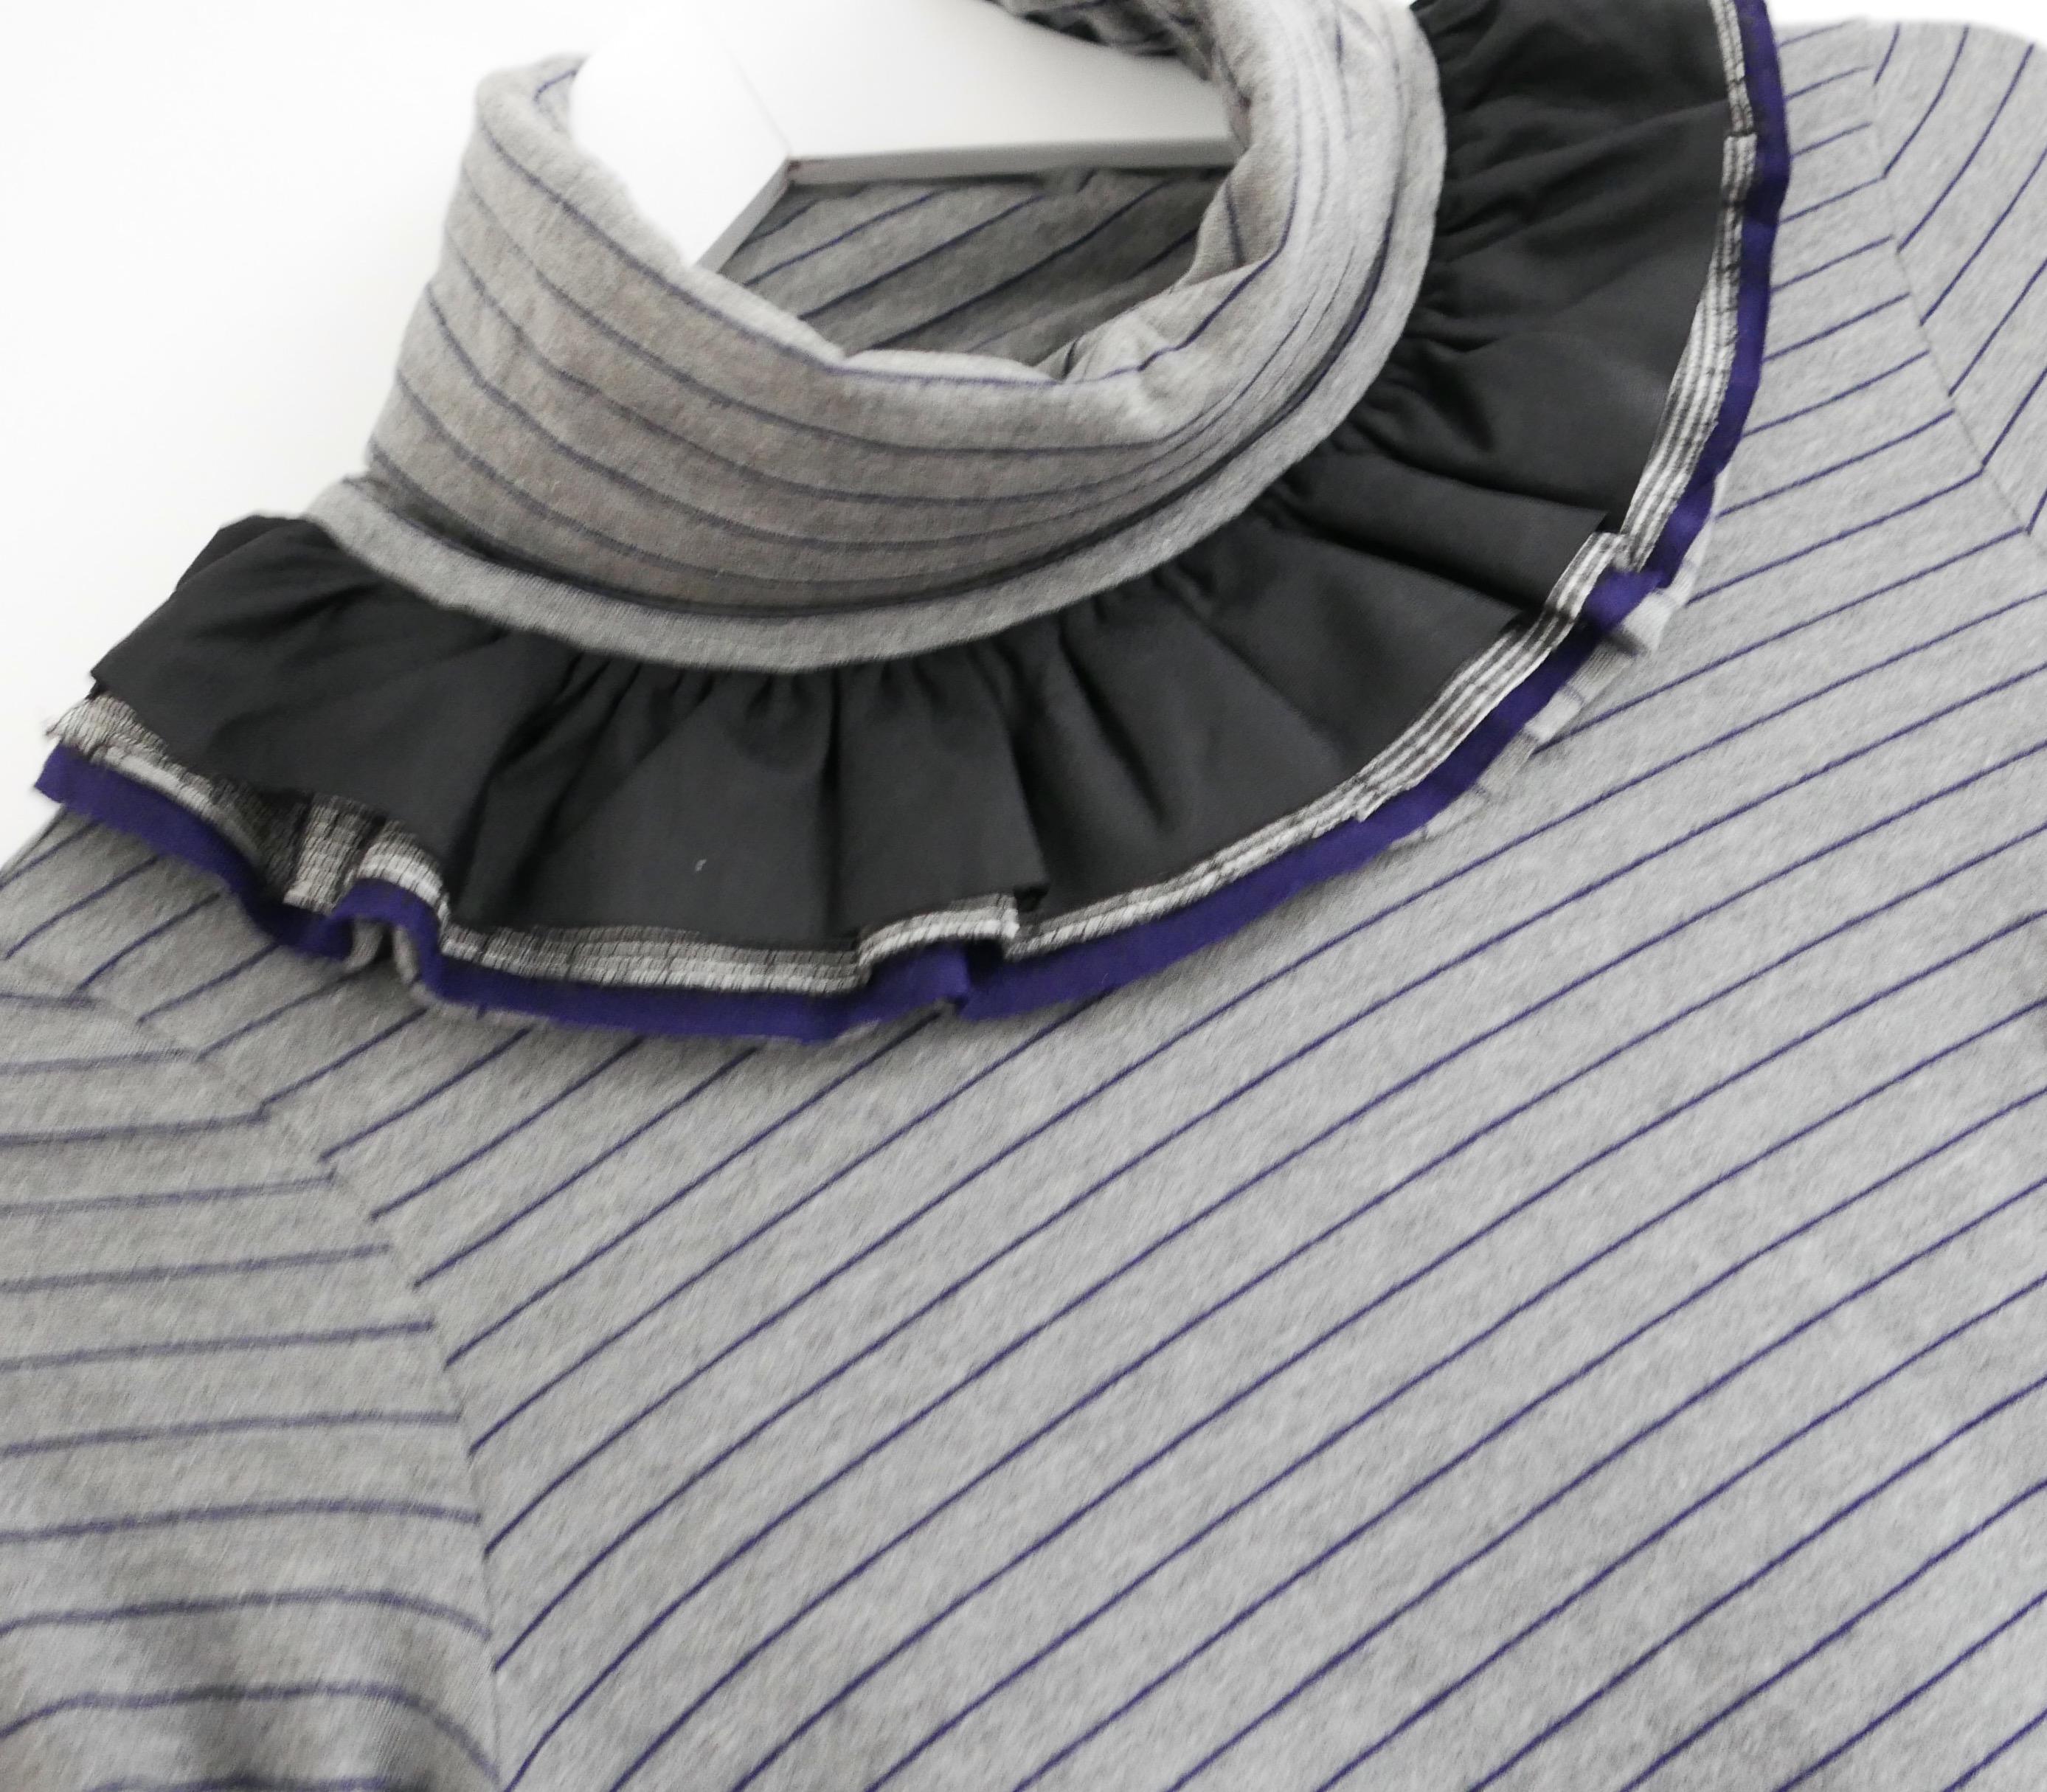 Gorgeous vintage Chanel top from the Fall 2008 08A collection. In excellent vintage condition.  Made from soft, super stretchy grey and navy striped cotton mix jersey. It has a deep roll neck, decorated with multi fabric frills and quilted cuffed